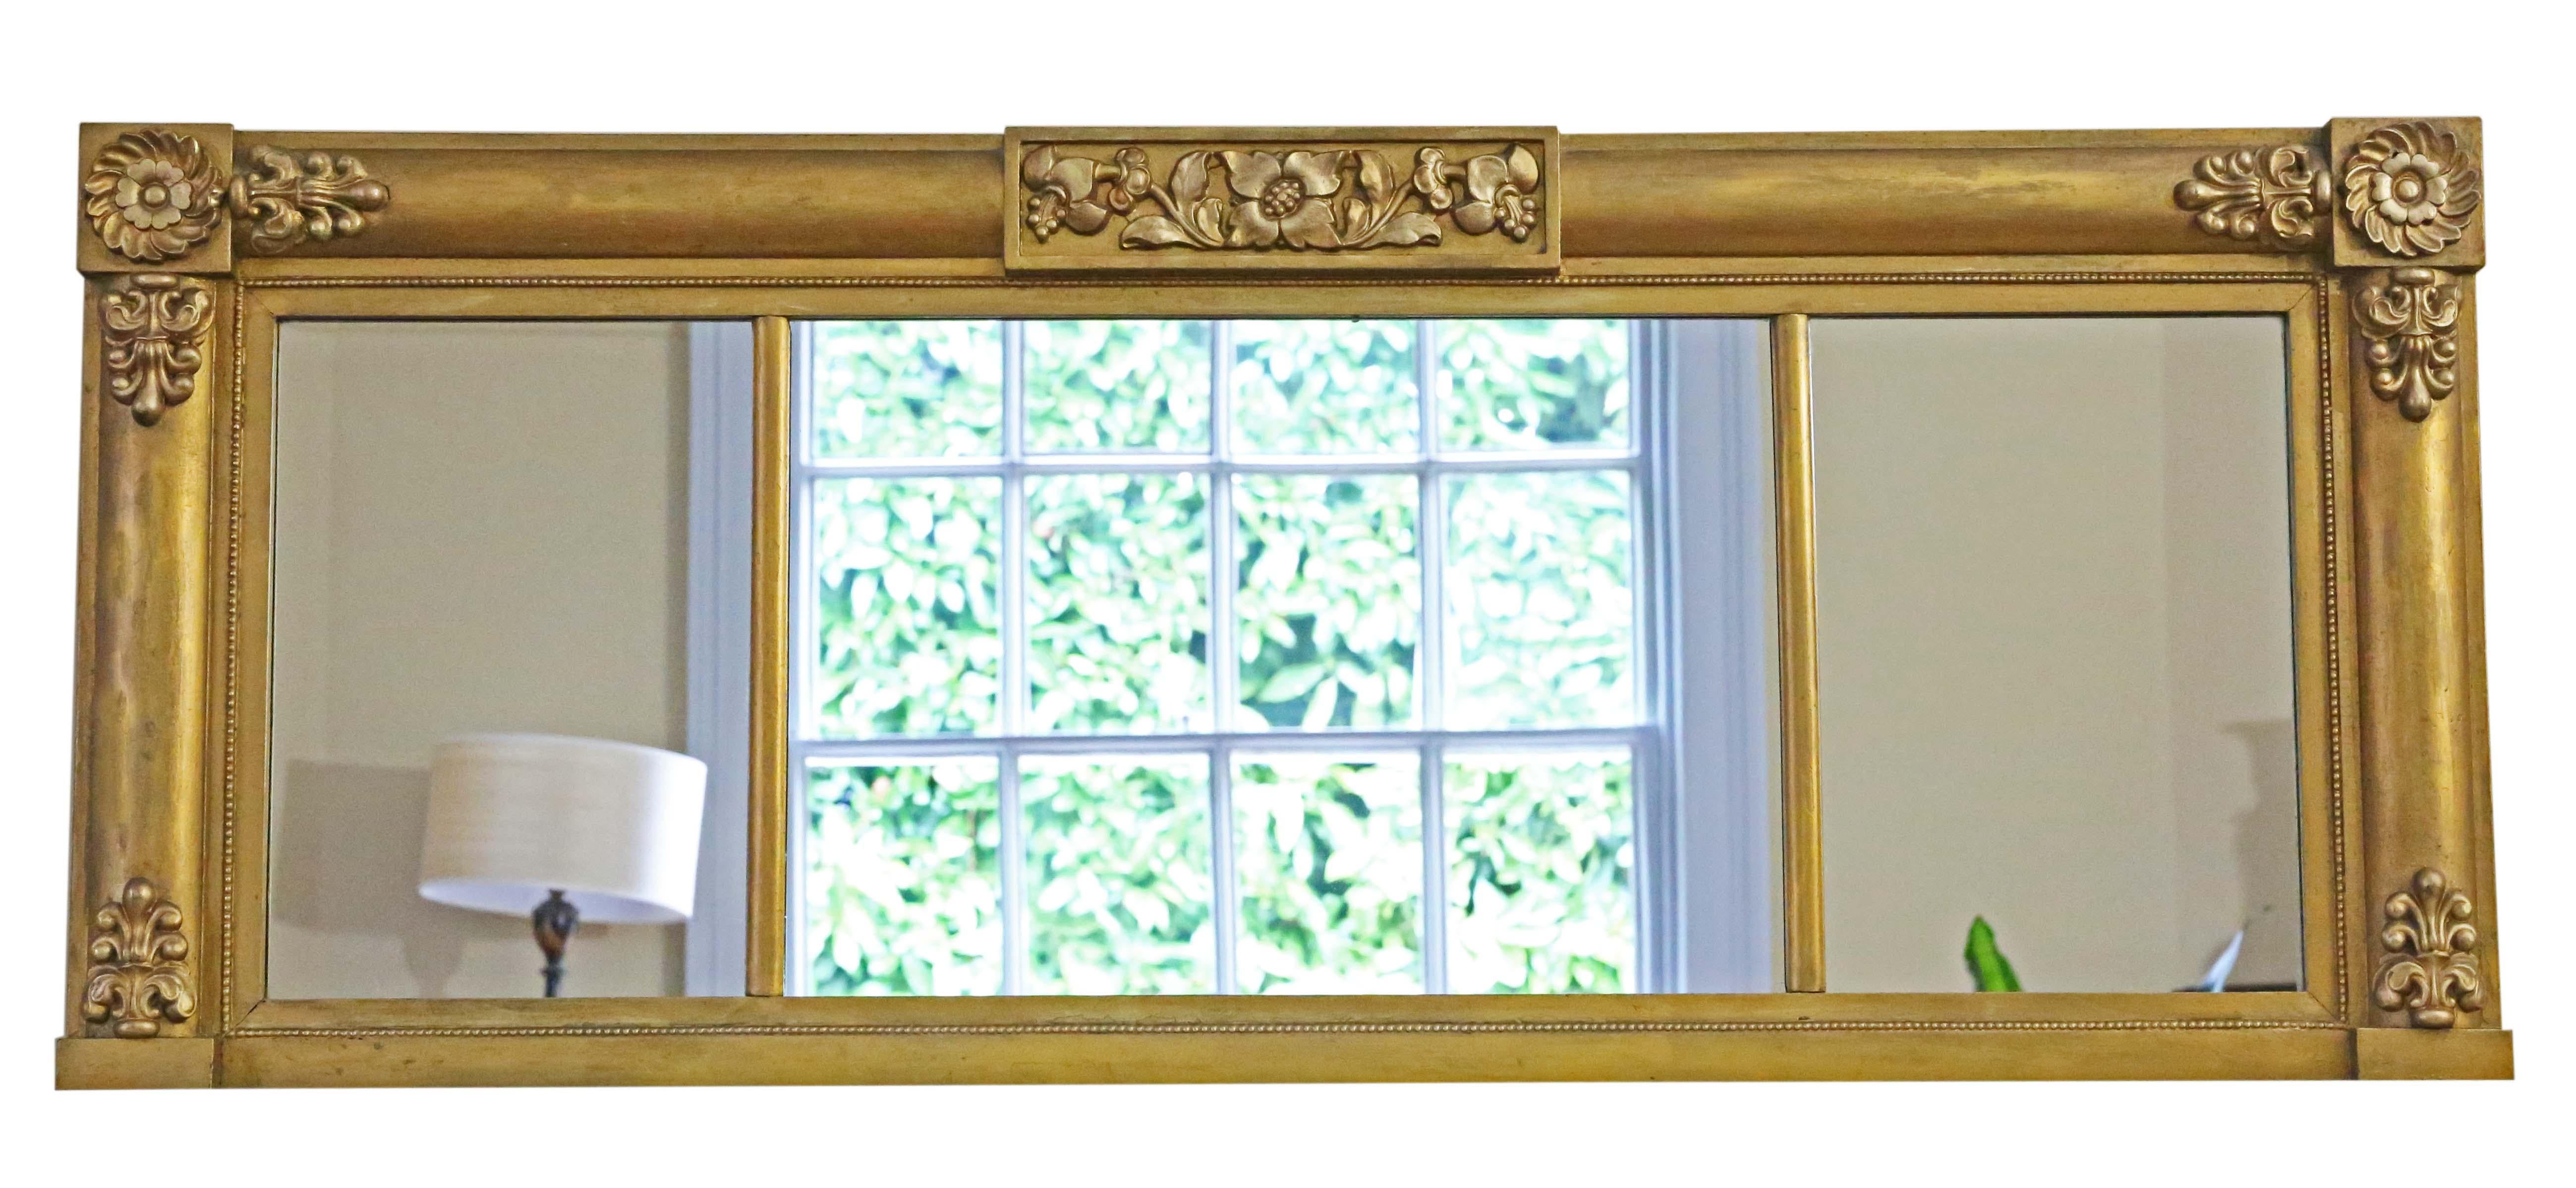 Antique large gilt overmantle wall mirror from the 19th Century, boasting fine quality with delicate floral decoration.

This mirror captivates with its simple yet striking design, adding character to any suitable space. The frame is robust, free